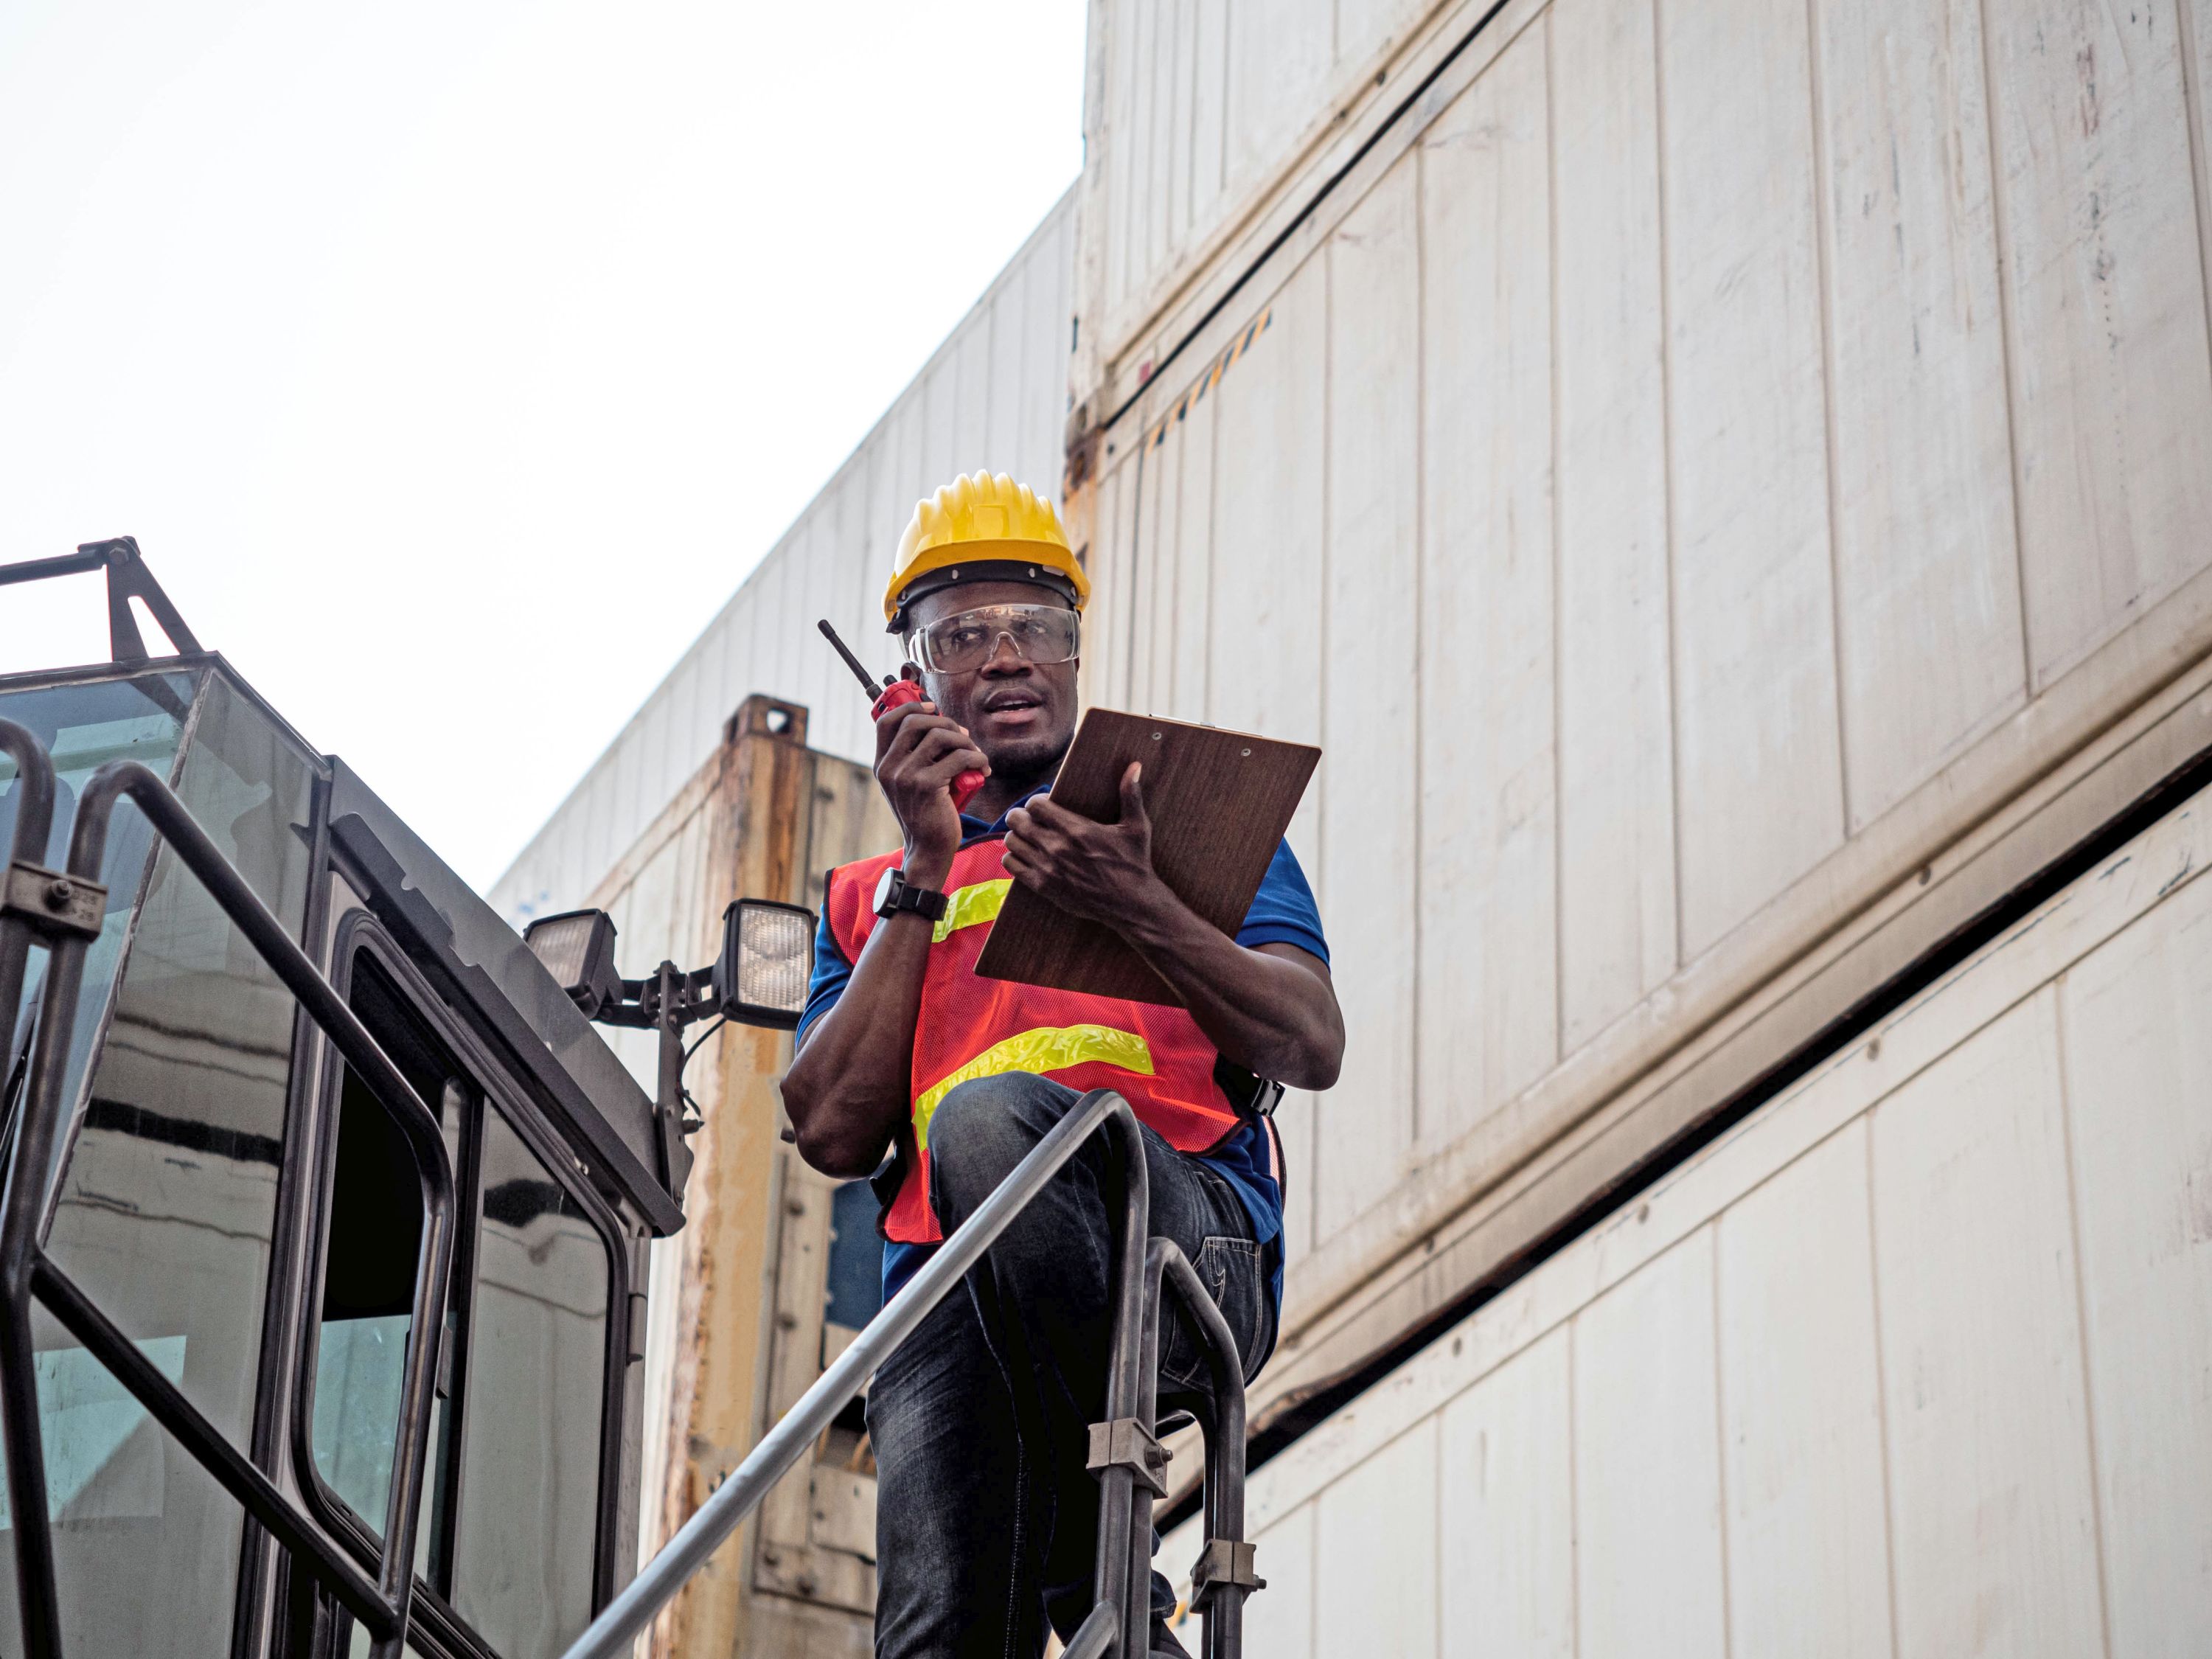 A foreman with yellow helmet and red waistcoat, holding a clipboard and speaking into a walkie-talkie.